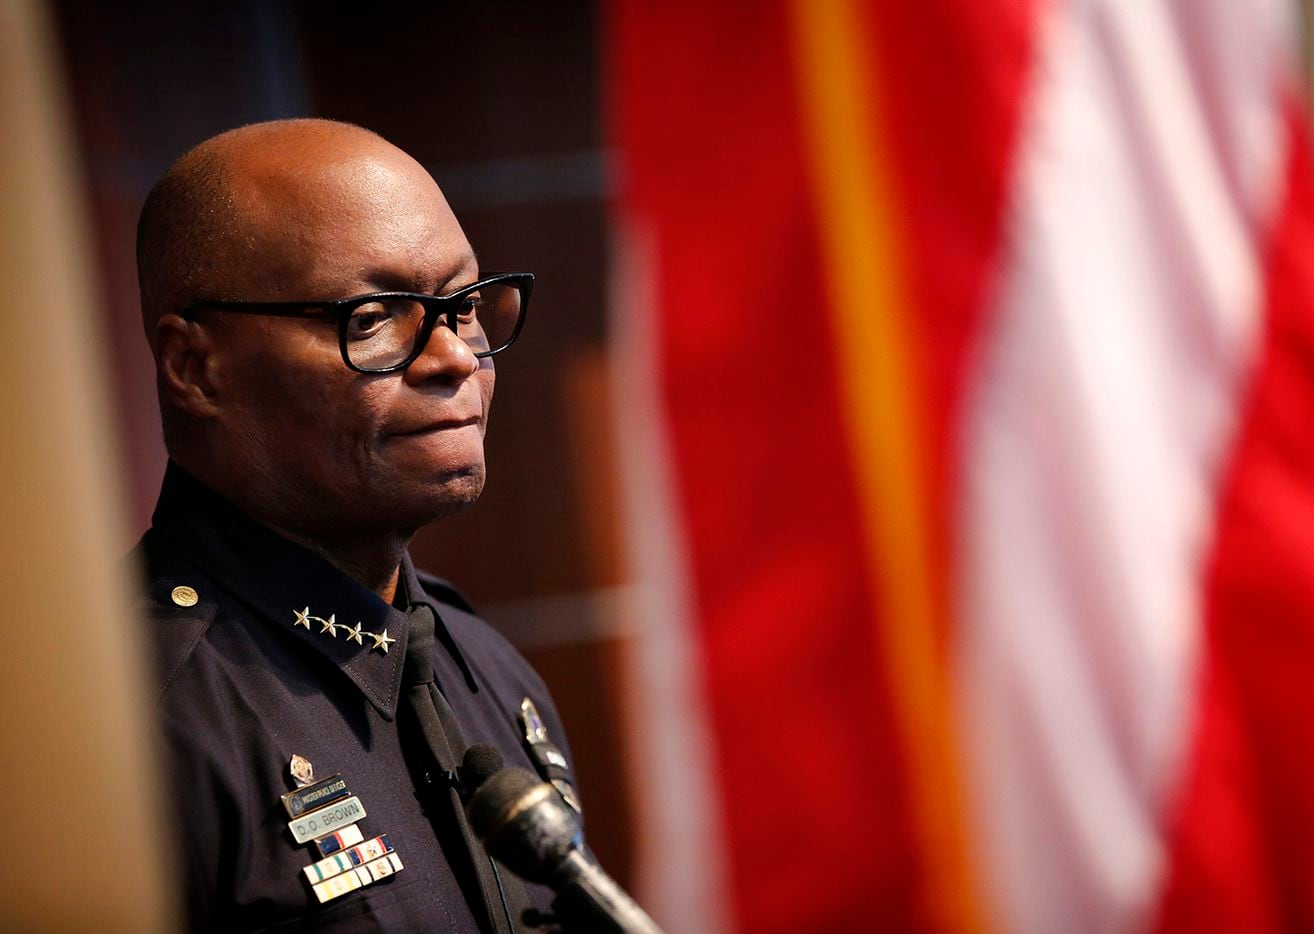 Dallas police chief David Brown listens to a question posed to him about last week's...